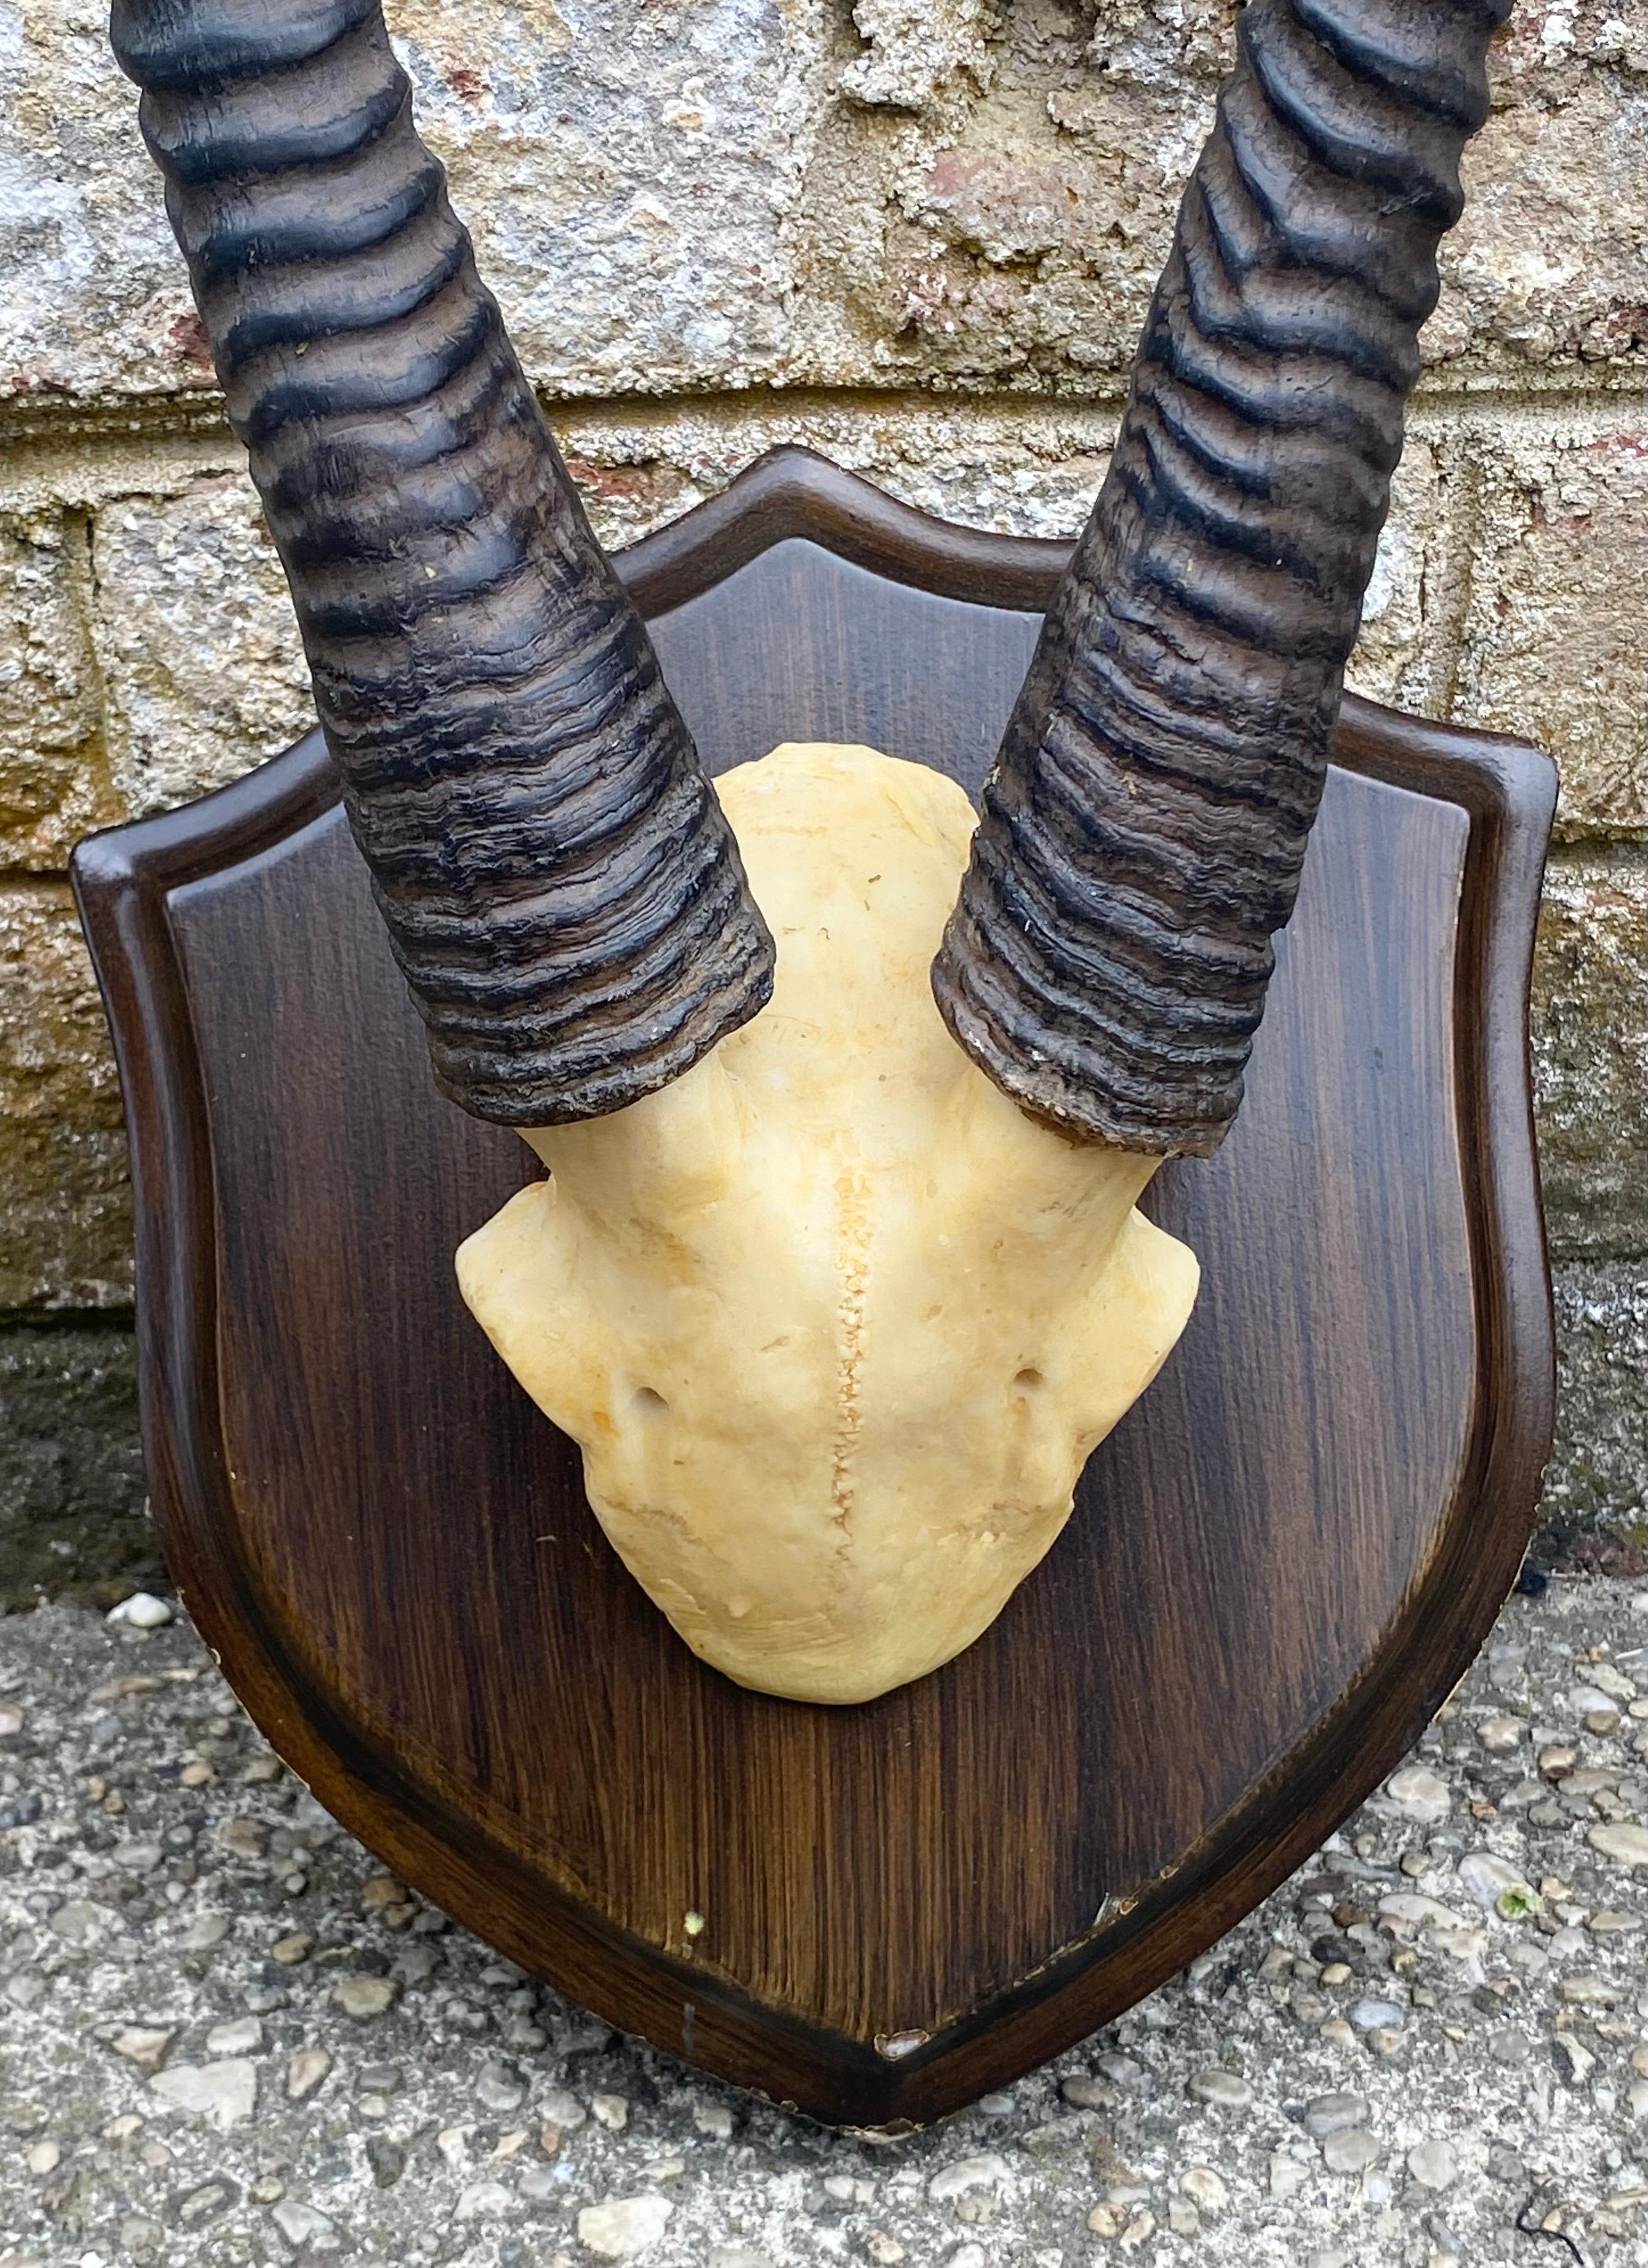 ibex horns for sale